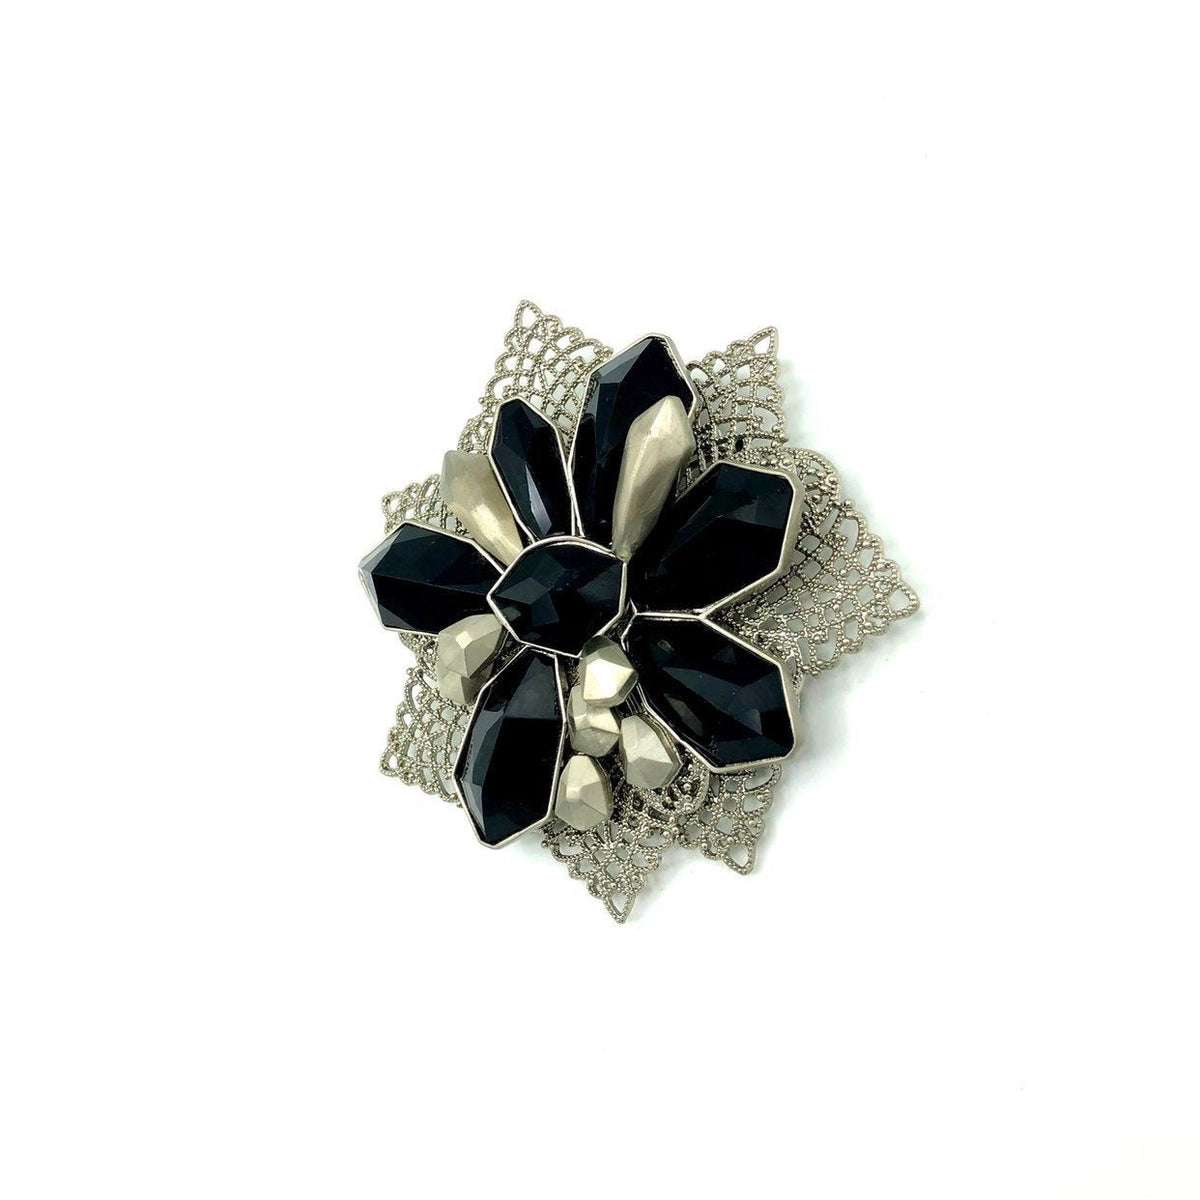 Givenchy Silver & Black Filigree Floral Vintage Brooch - 24 Wishes Vintage Jewelry